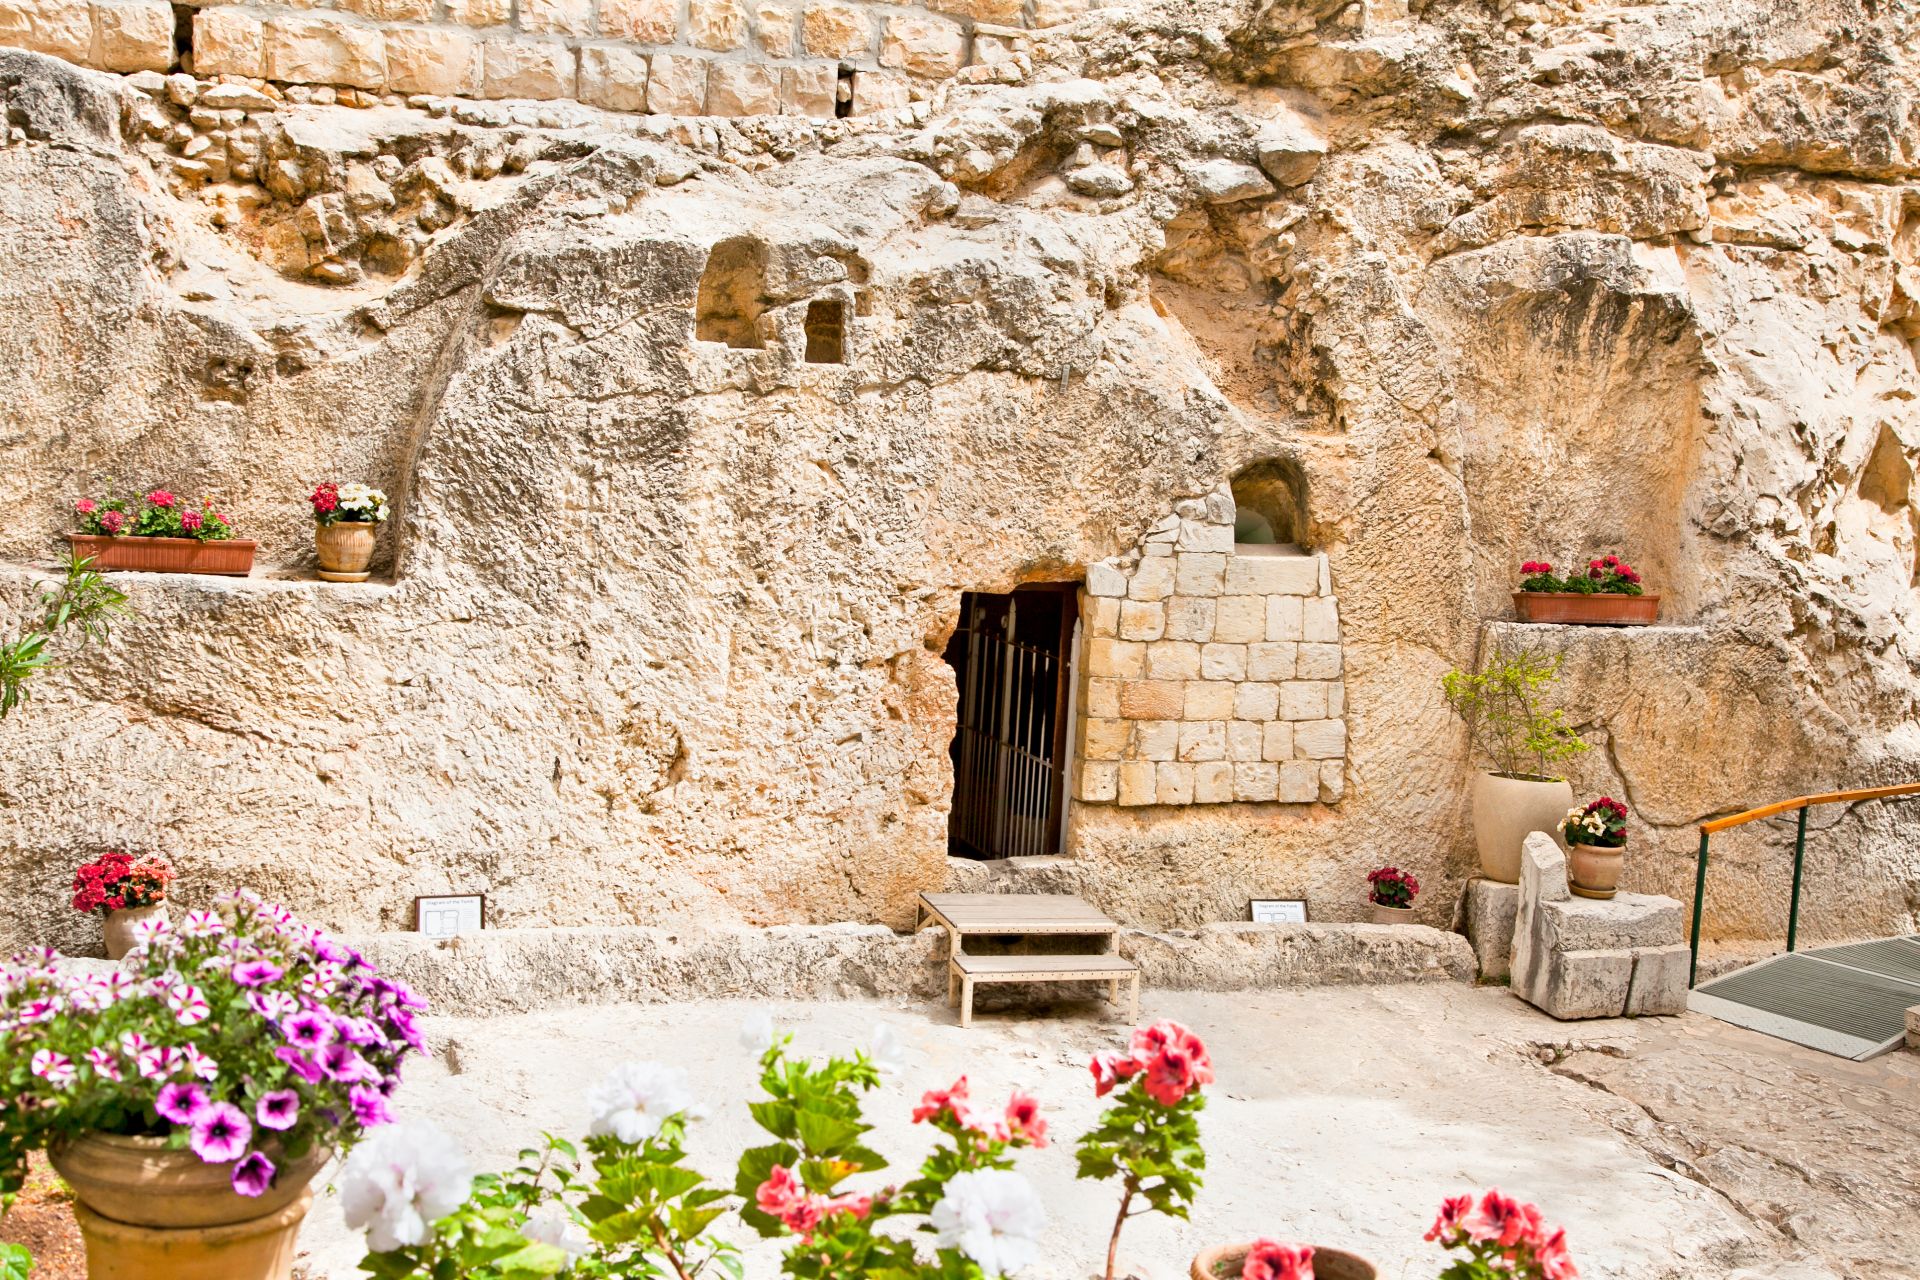 ISRAEL Garden Tomb in Jerusalem, one of two sites proposed as the place of Jesus burial